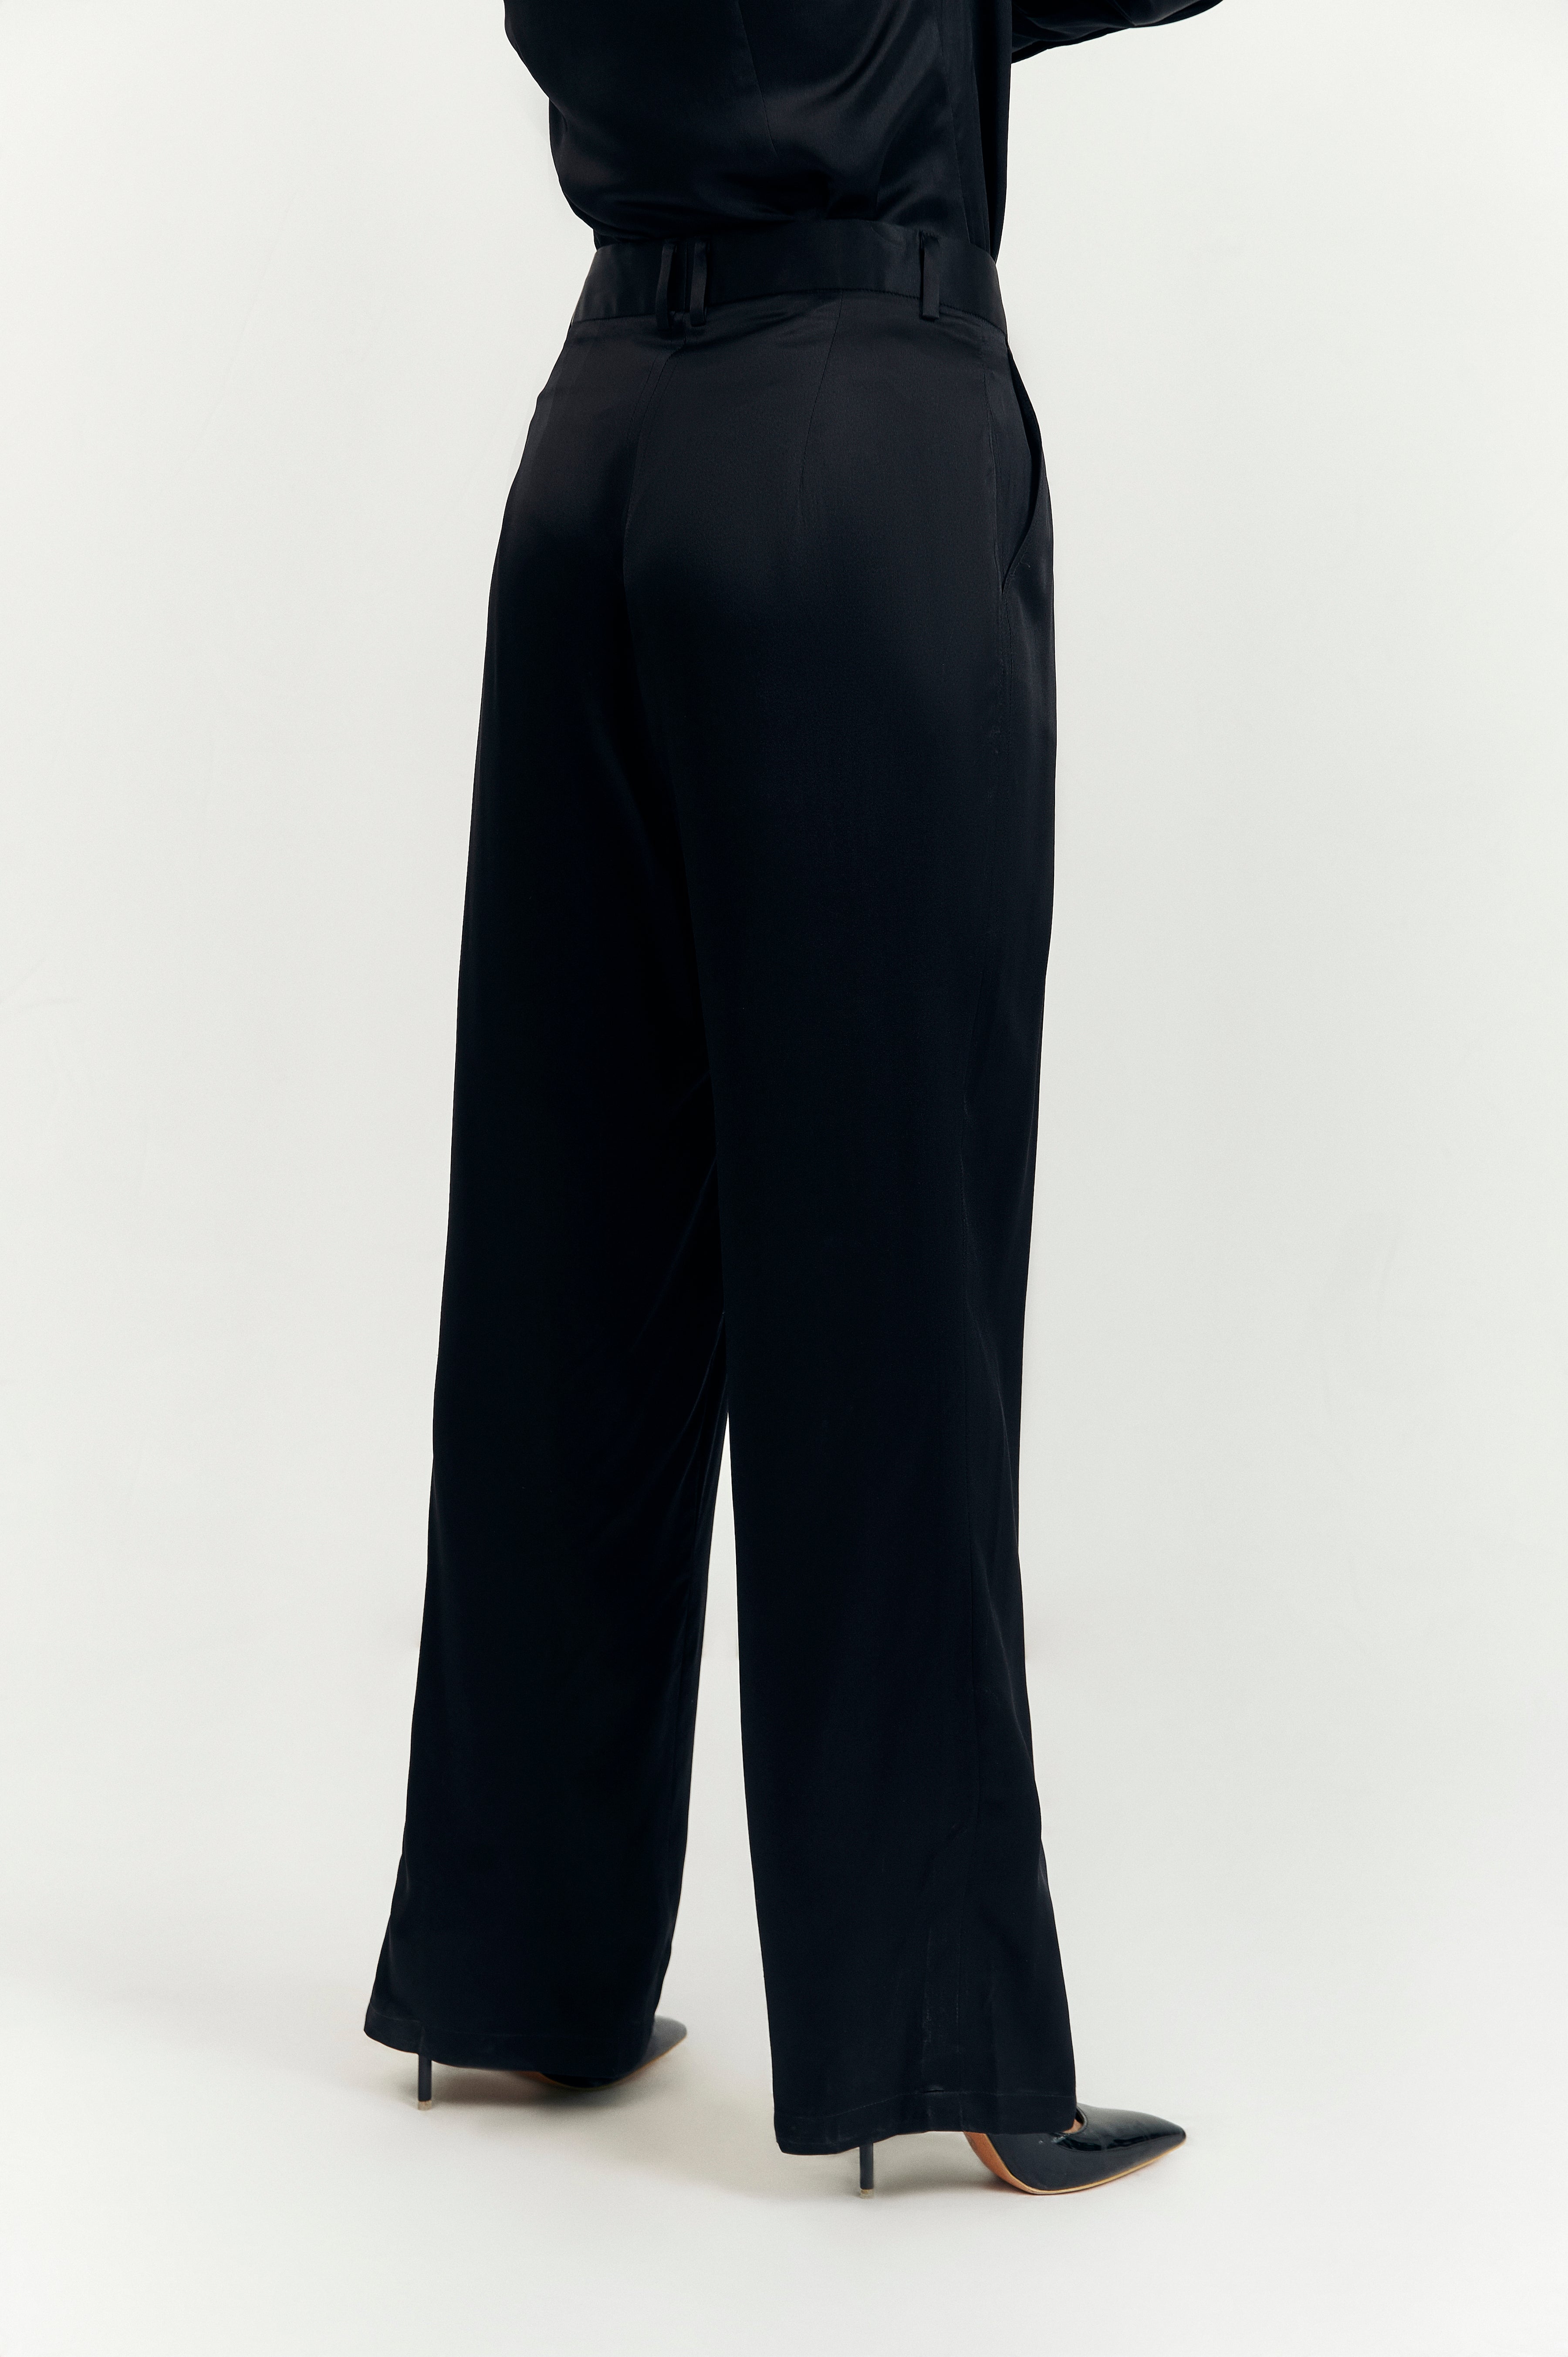 The Rosalind Silk Trousers